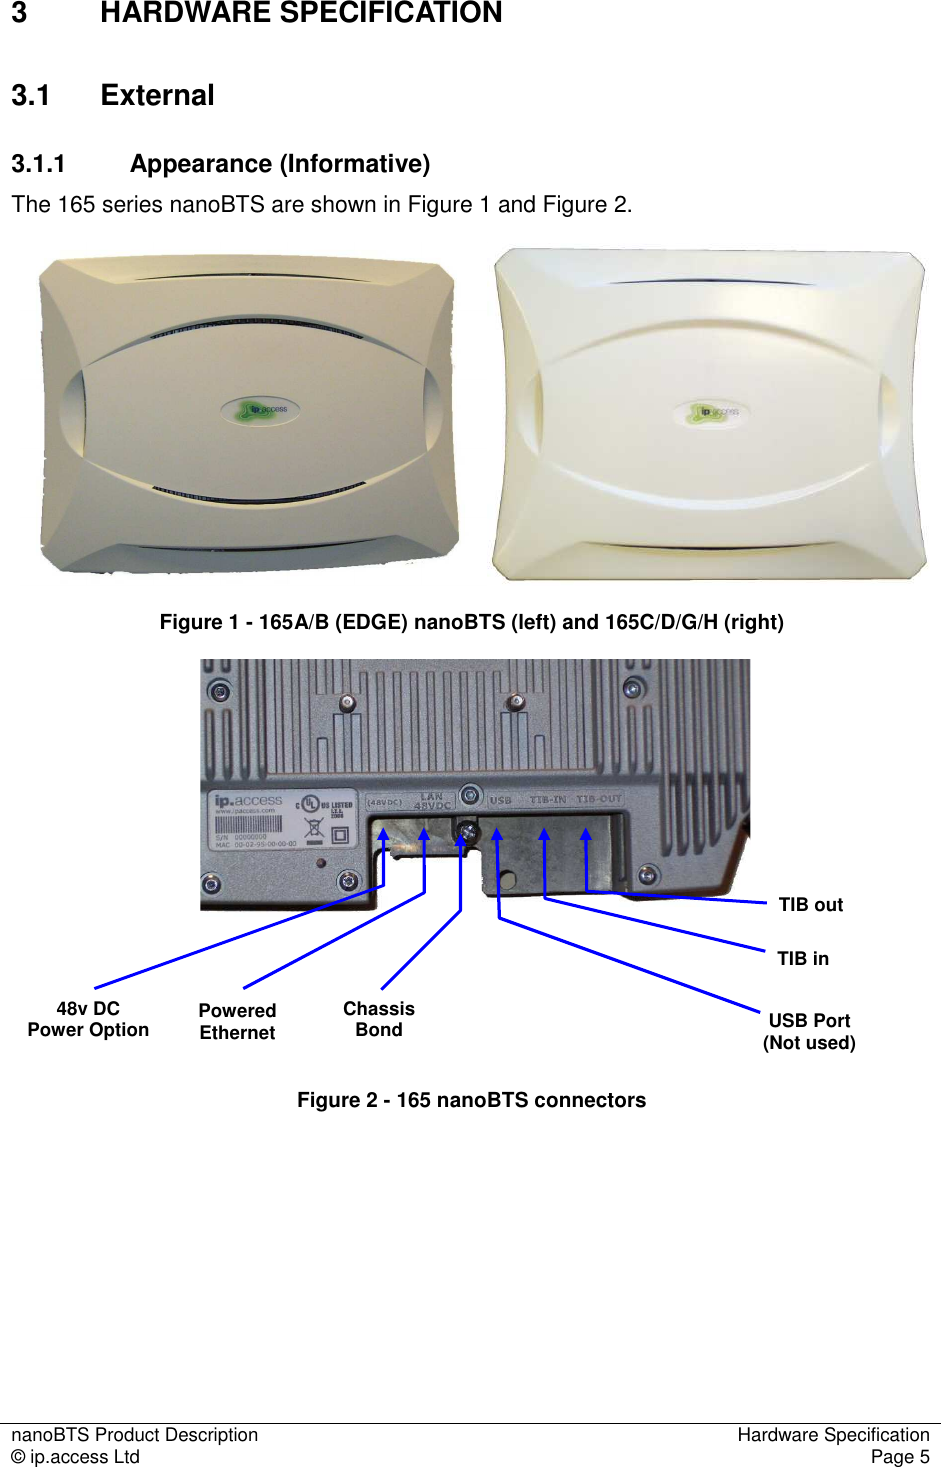 nanoBTS Product Description  Hardware Specification © ip.access Ltd  Page 5  3  HARDWARE SPECIFICATION 3.1  External 3.1.1  Appearance (Informative) The 165 series nanoBTS are shown in Figure 1 and Figure 2.    Figure 1 - 165A/B (EDGE) nanoBTS (left) and 165C/D/G/H (right)       Figure 2 - 165 nanoBTS connectors Chassis Bond Powered Ethernet TIB in TIB out 48v DC  Power Option  USB Port (Not used) 